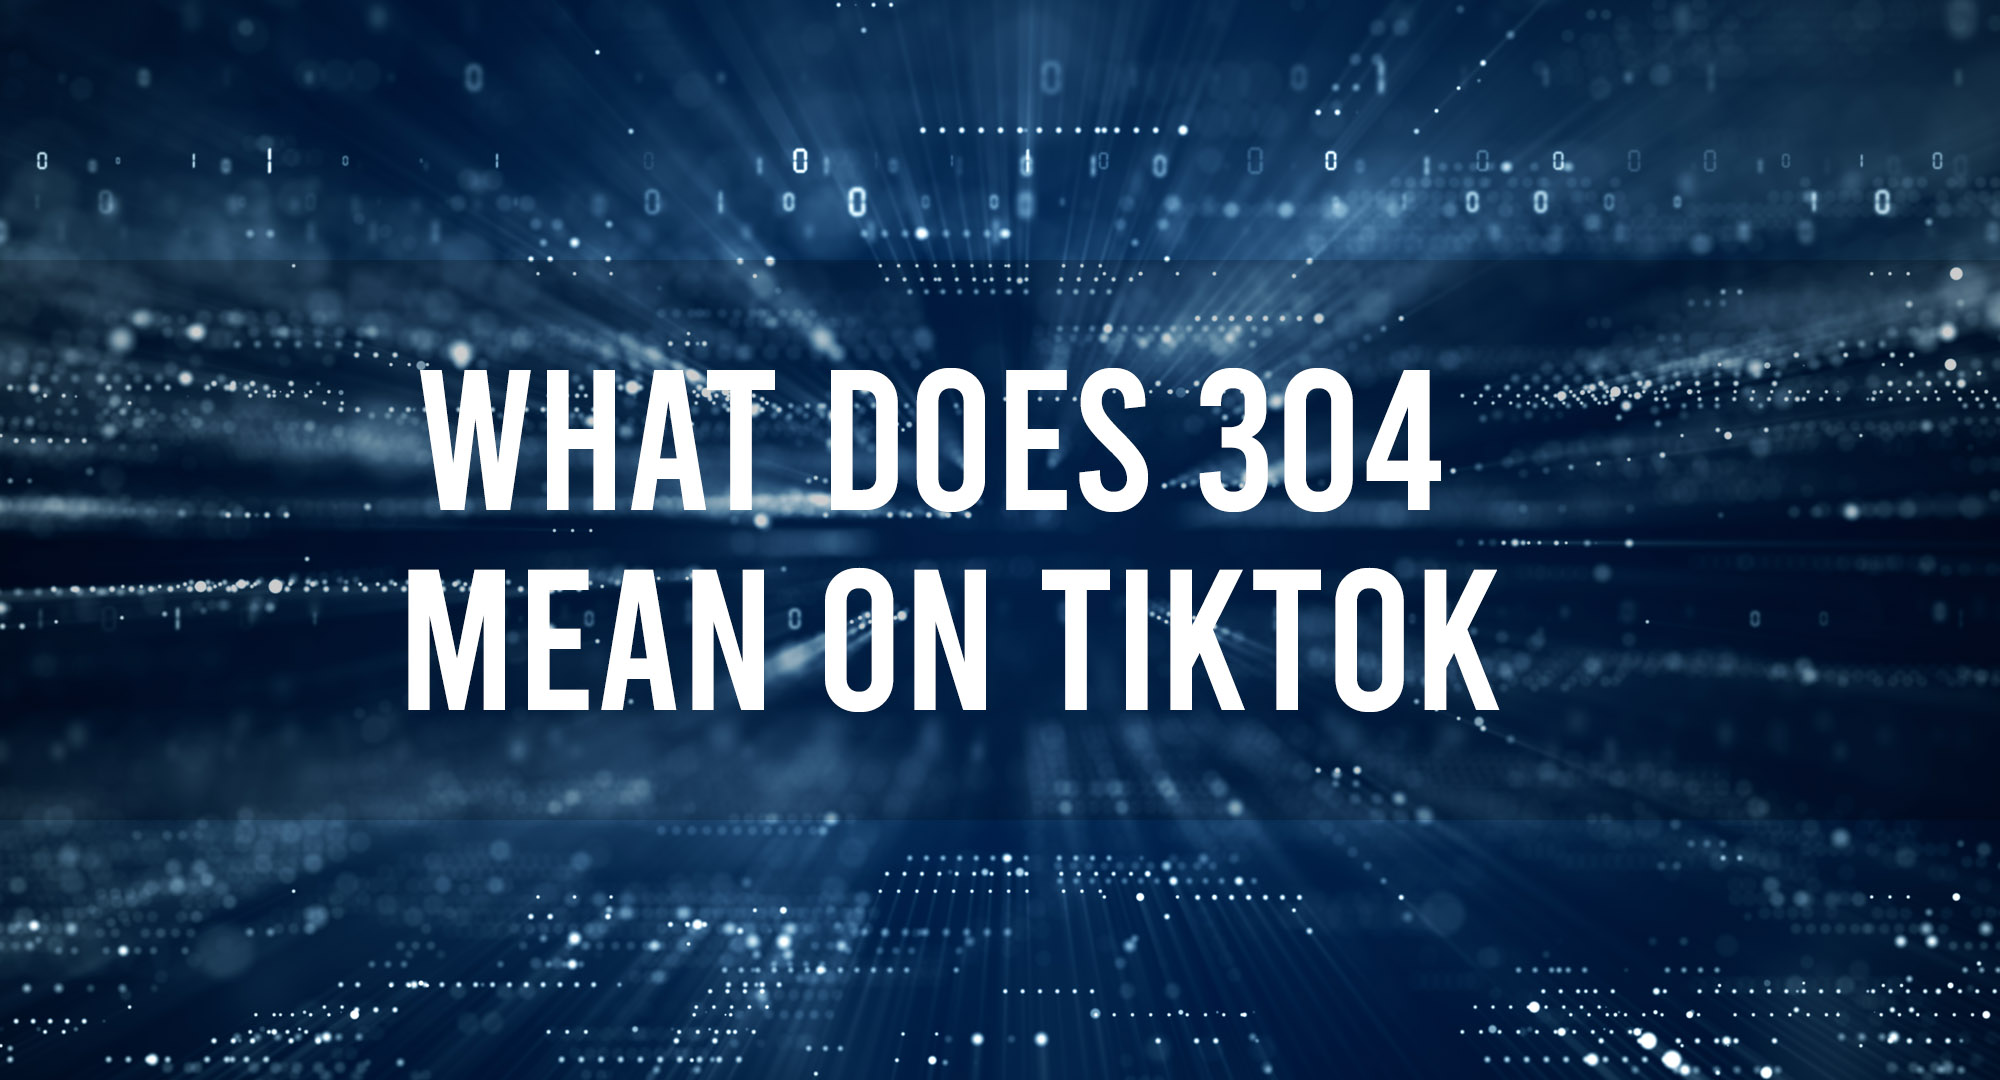 What does 304 mean on tiktok